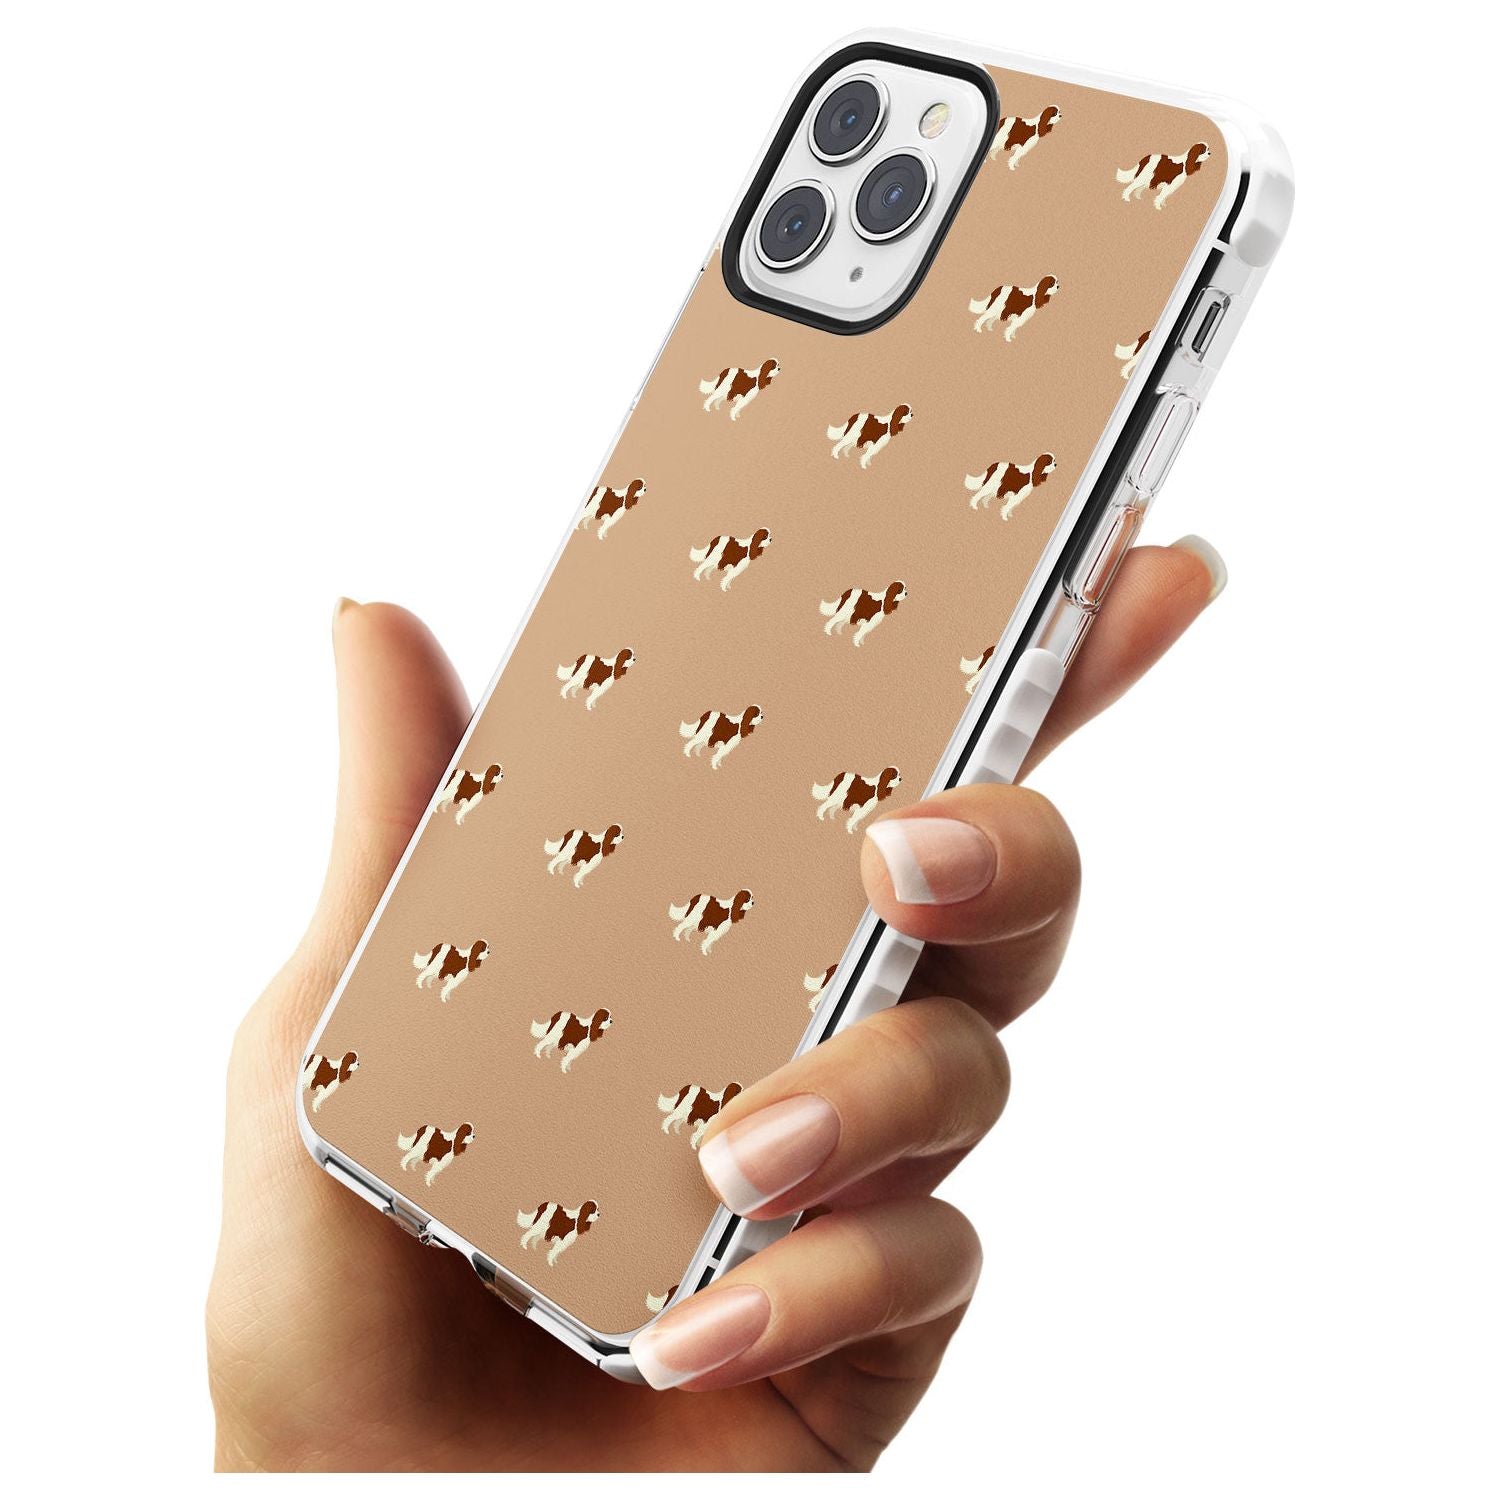 Cavalier King Charles Spaniel Pattern Impact Phone Case for iPhone 11 Pro Max